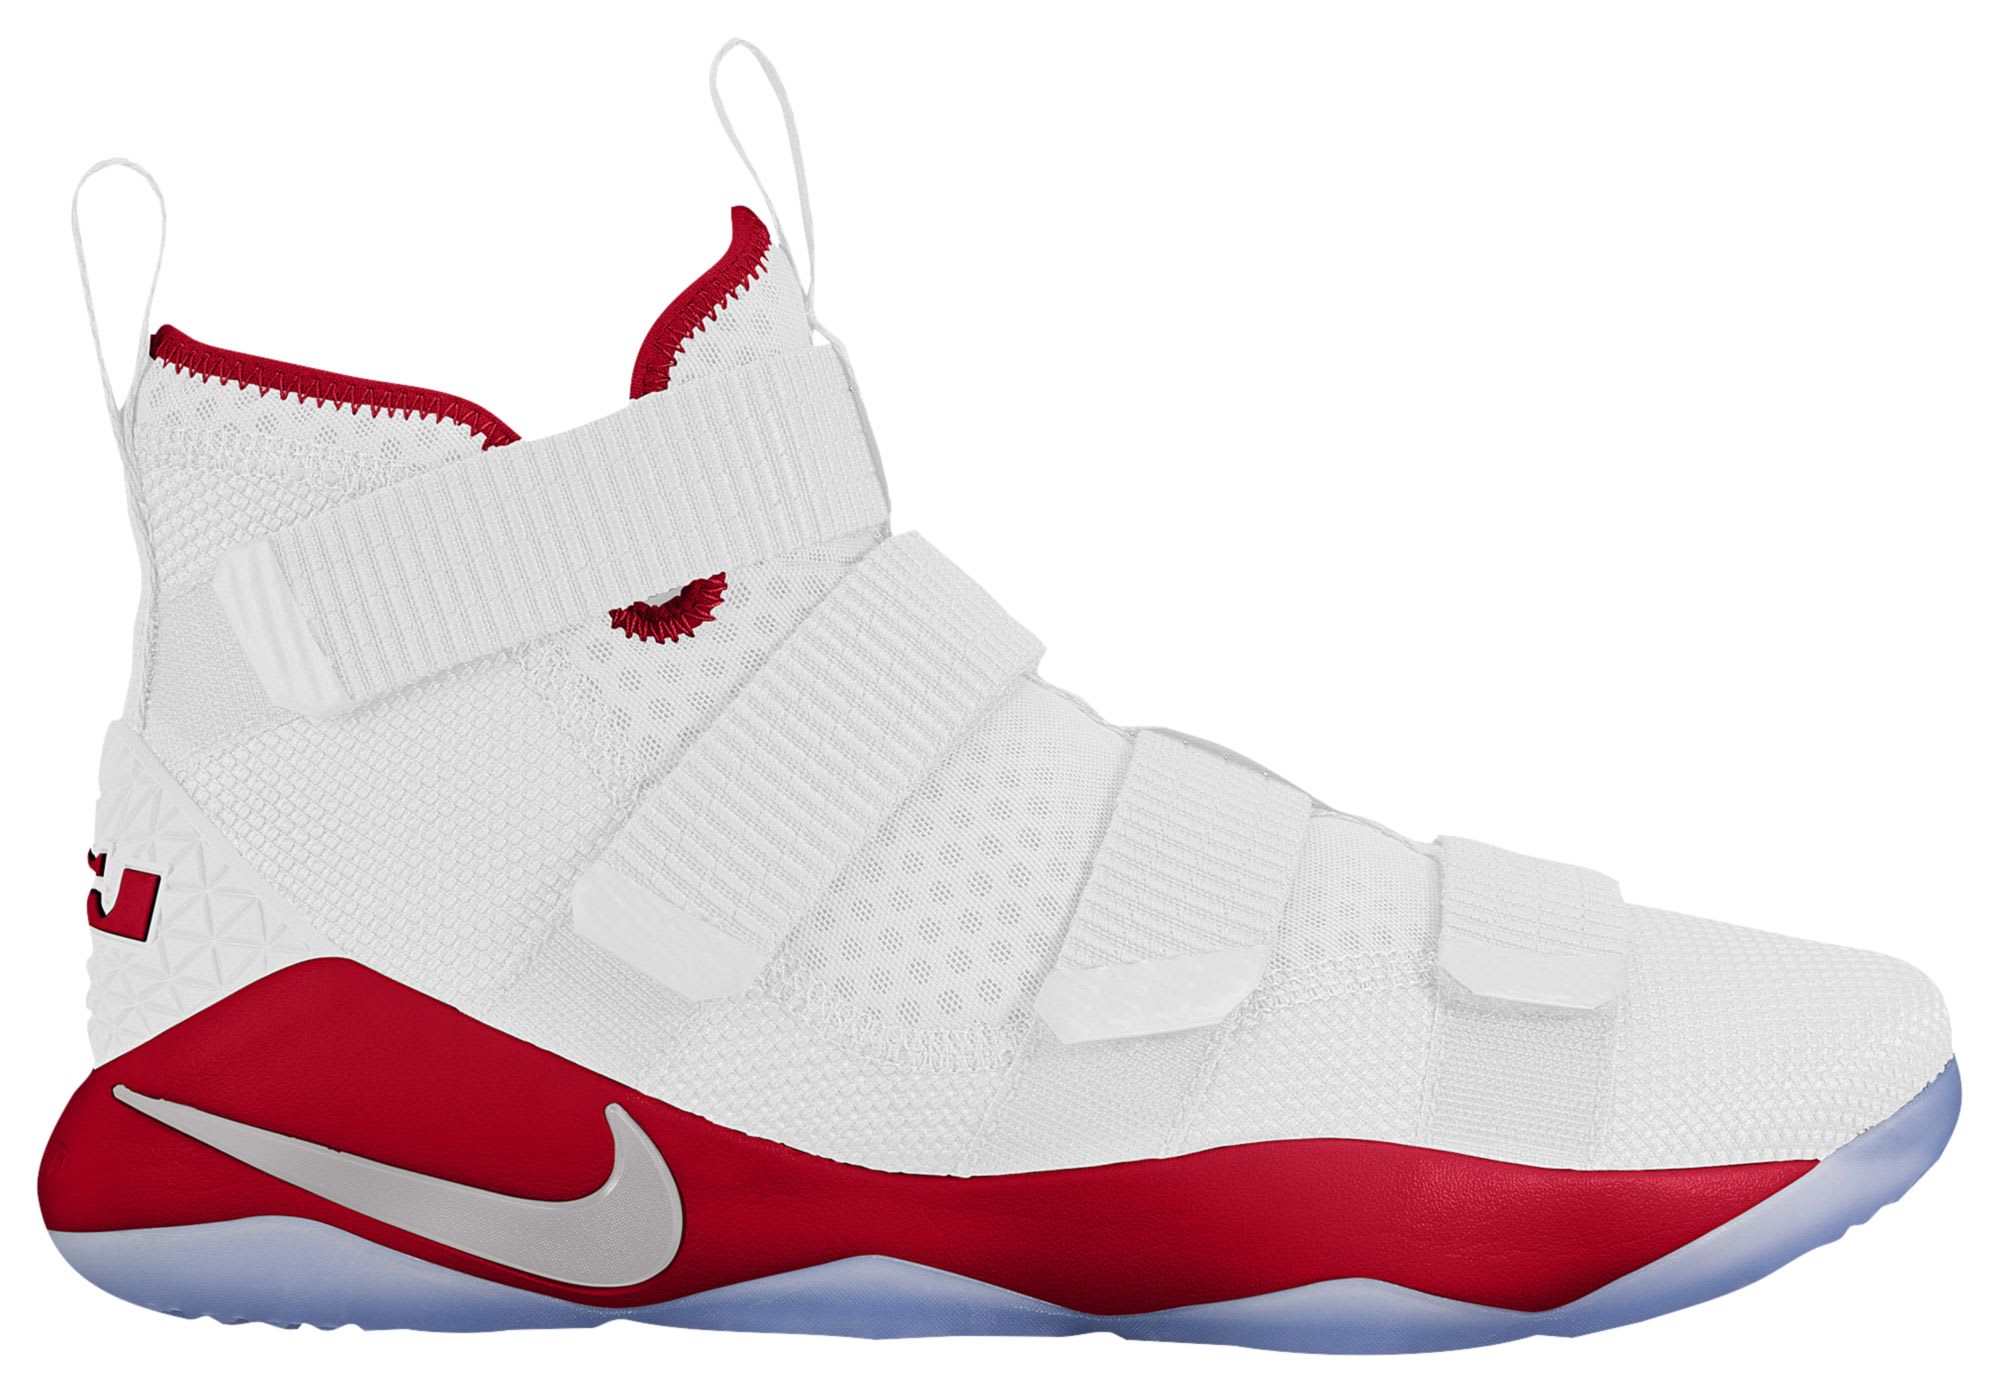 Nike LeBron Soldier 11 TB White Red